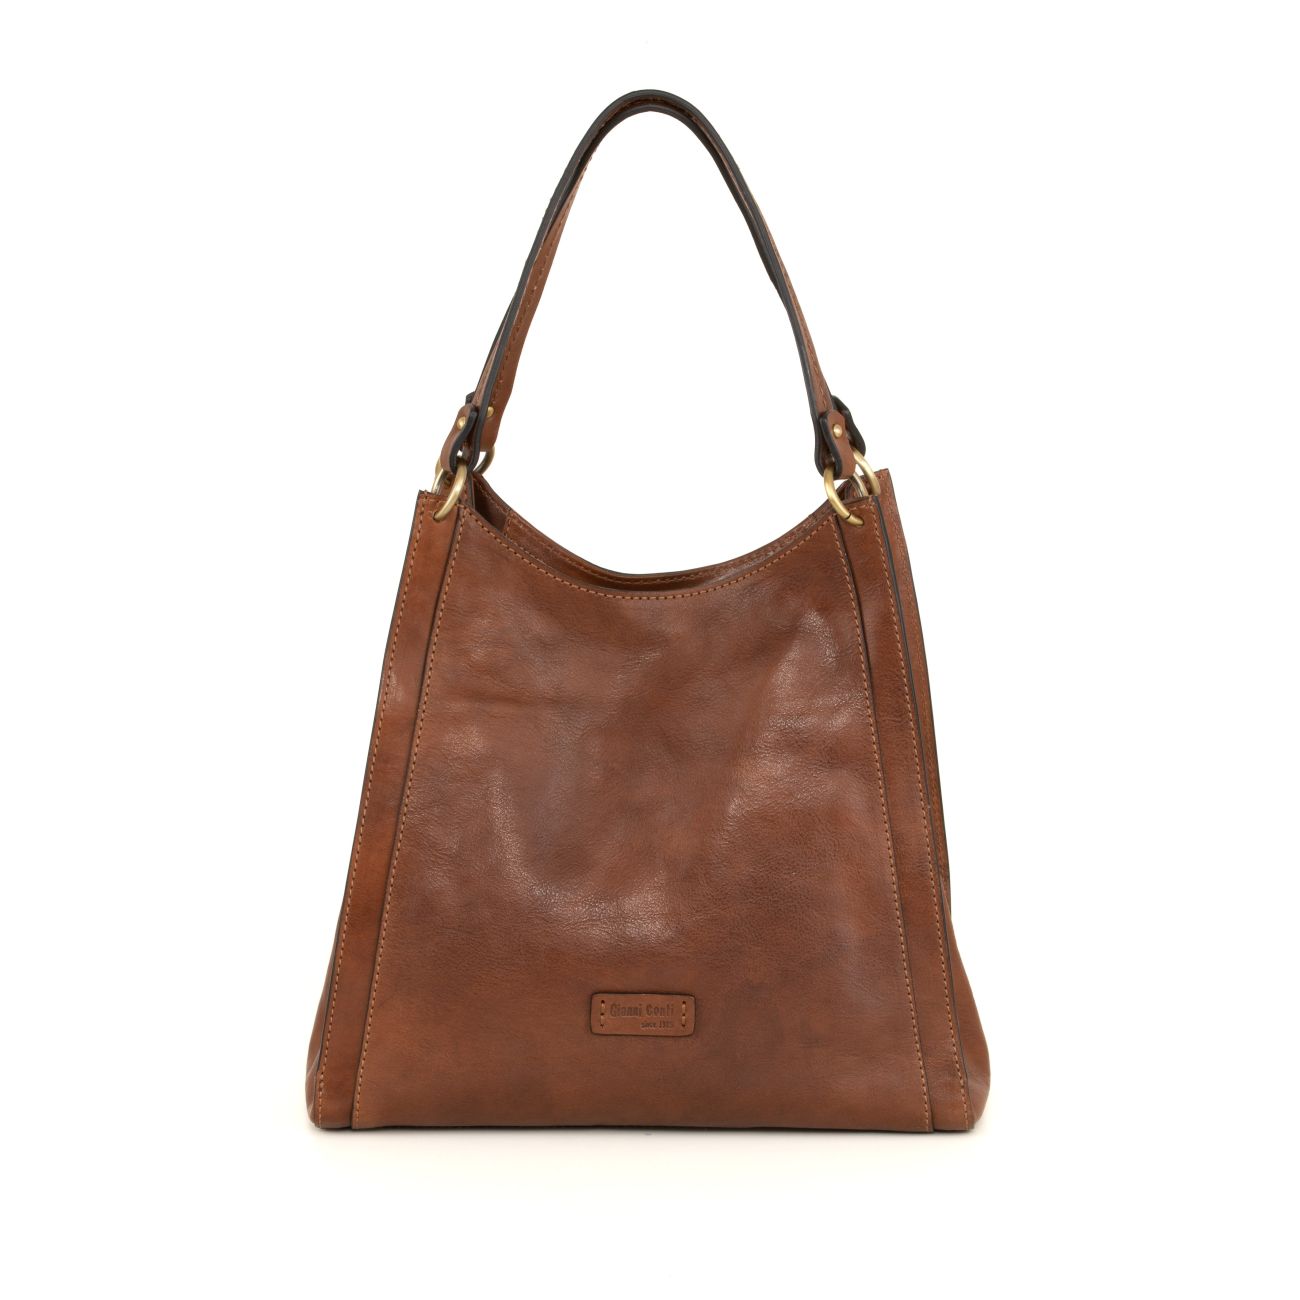 CINZIA by Gianni Conti - Vegetable-Tanned Leather Top Handle Bag